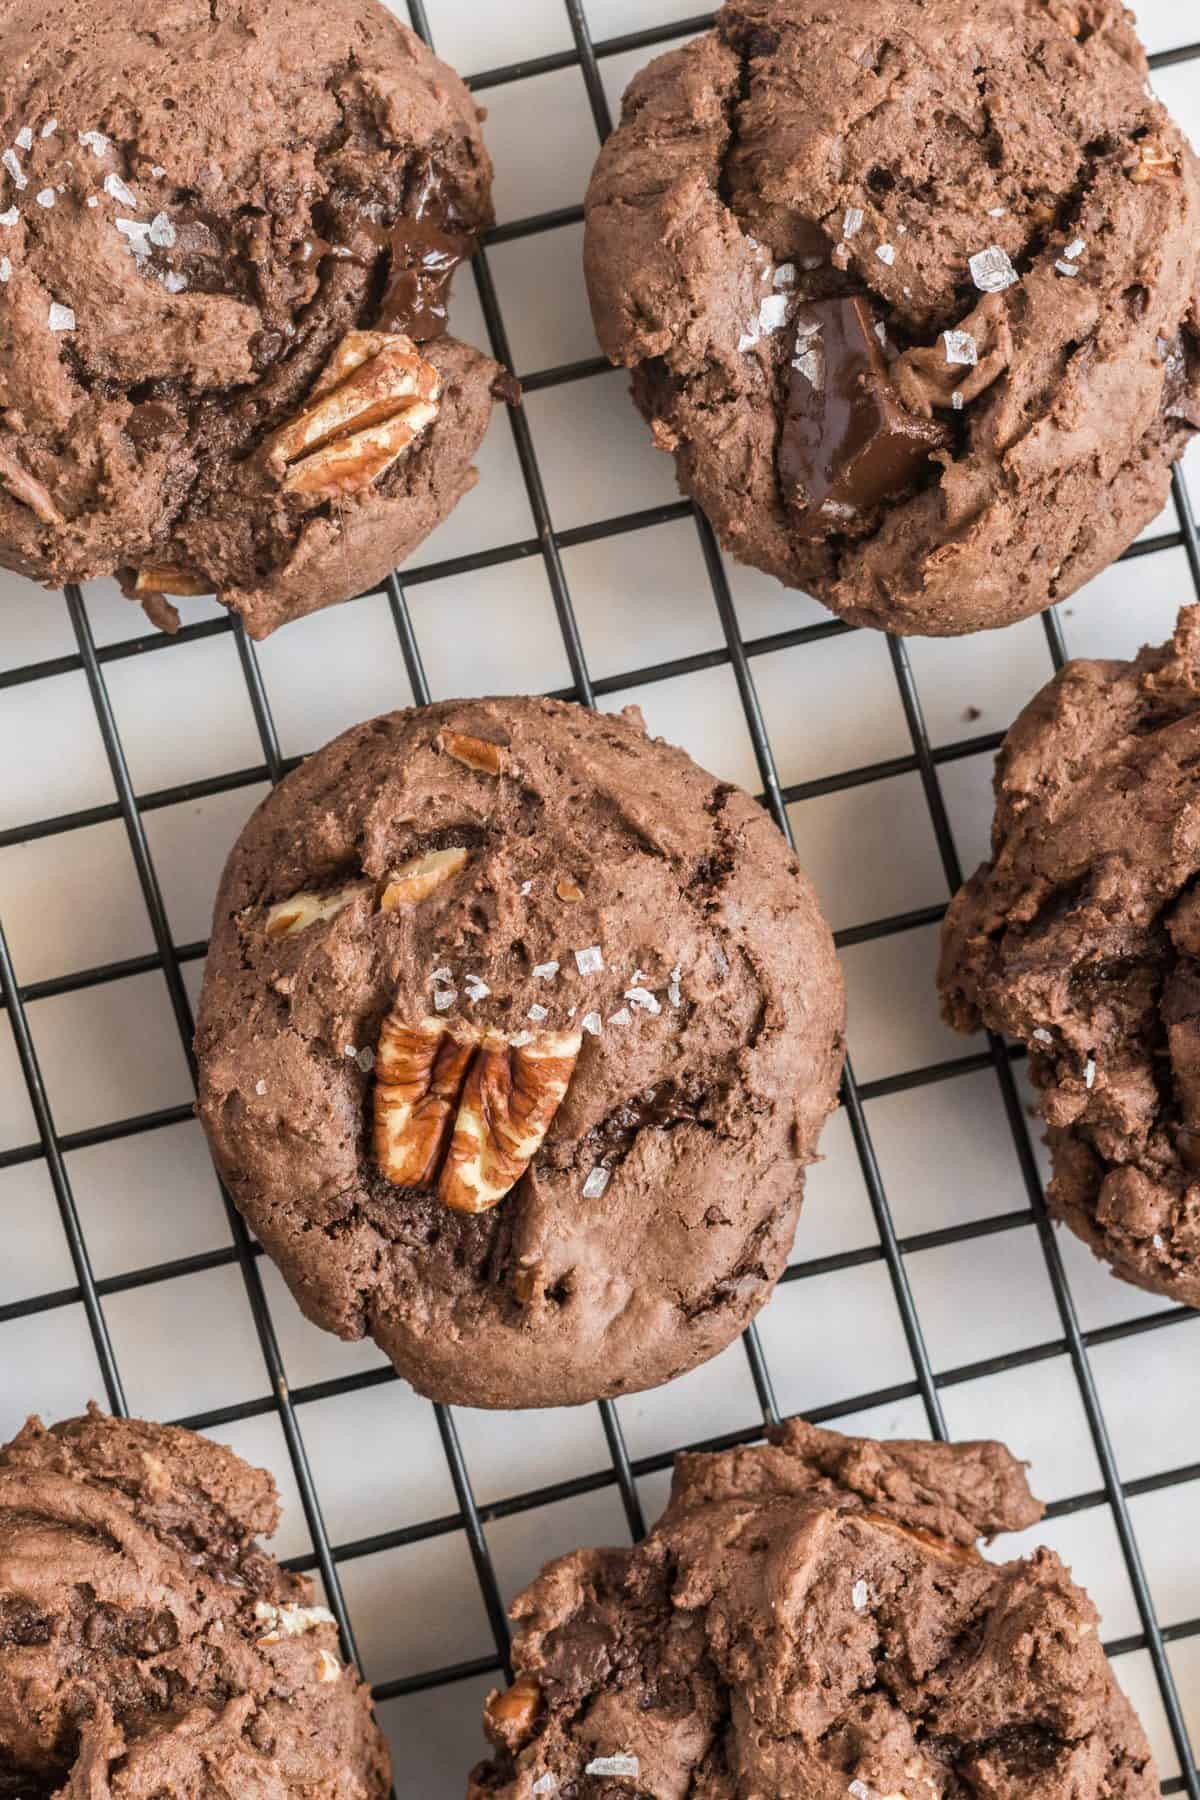 Up close photo of a baked chocolate cake mix cookie topped with pecans and sea salt